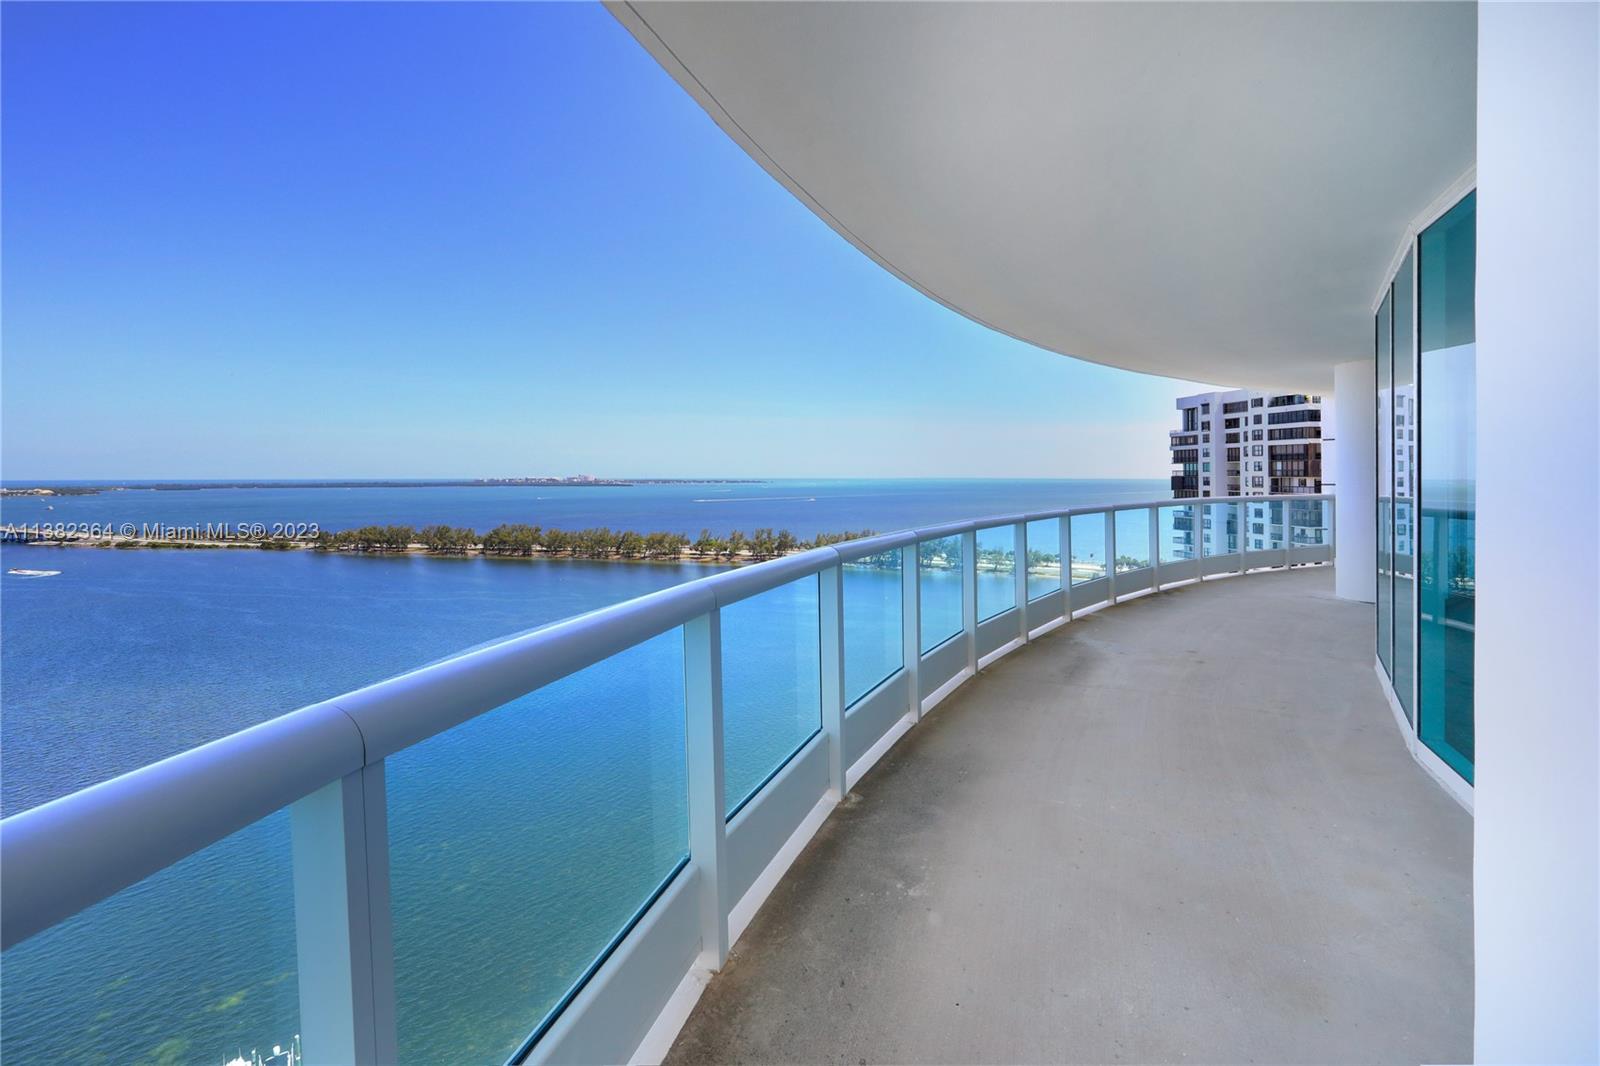 Unobstructed, gorgeous views of Biscayne Bay and Key Biscayne from this spacious, coveted Bristol 01 line unit! The wrap-around porches are deep, protected and give a perfect vista of the water! This unit, with its grand spaces, is a blank canvas ready for your vision and restoration. The exposed concrete floors run throughout, and the generous primary suite offers 2 baths. This is the perfect opportunity to create your 3 bedroom, 4 bathroom dream home in this iconic building with amenities like 24 hour concierge, security, valet parking, tennis, heated pool, gym, playroom, electric car charging and more!